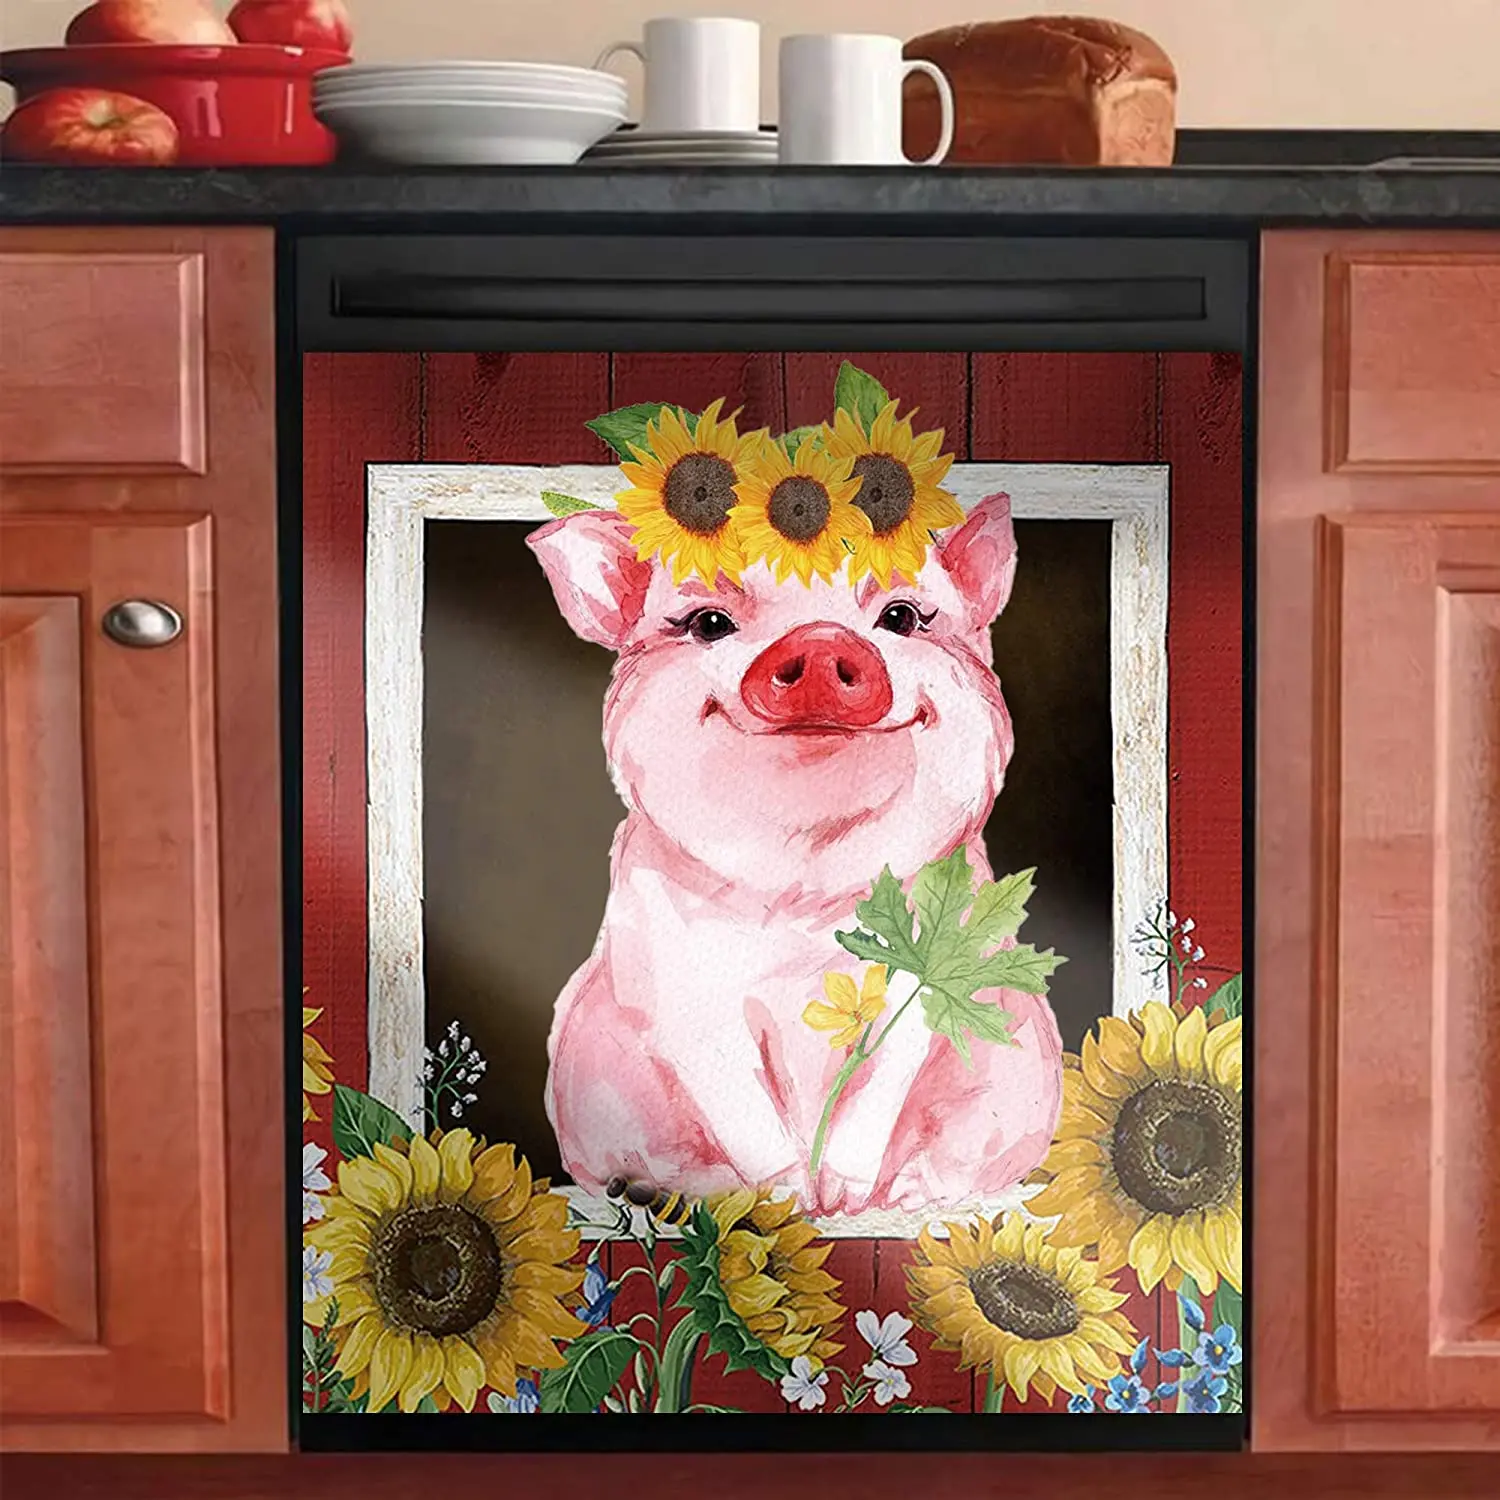 

MLGB Dishwasher Sticker Cover Decorative Pig and Sunflower with Red Barn Dishwasher Covers for The Front Dishwasher Door